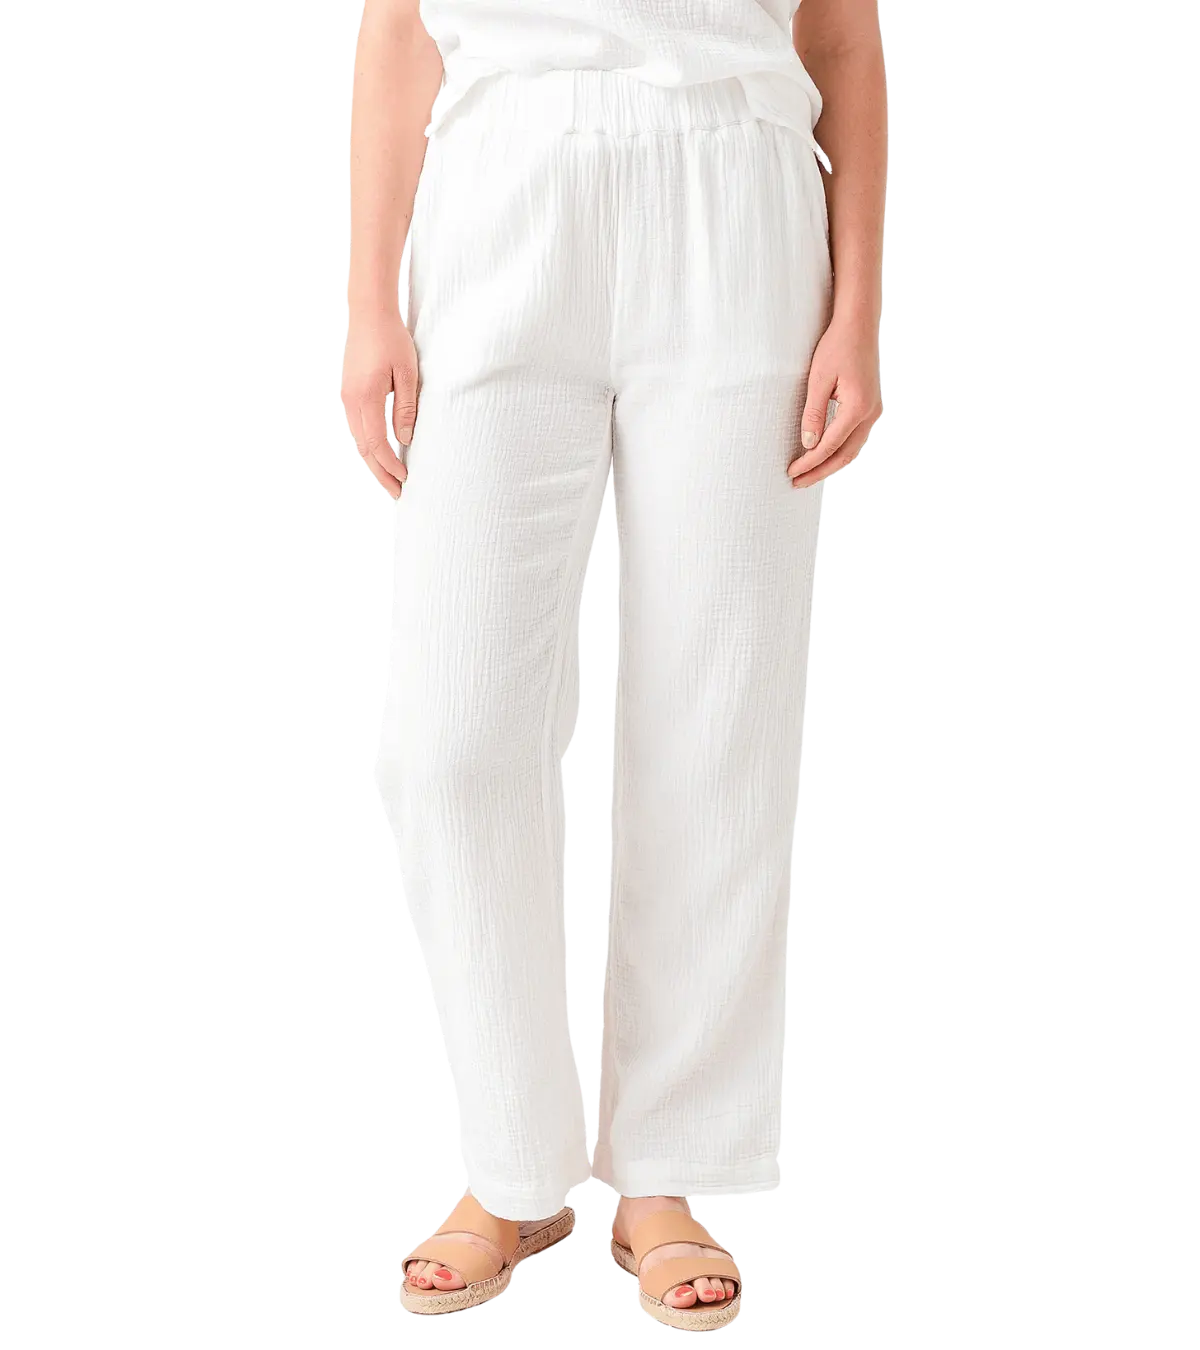 Buy Stripe Women Straight Trouser Navy Blue White Cotton for Best Price,  Reviews, Free Shipping